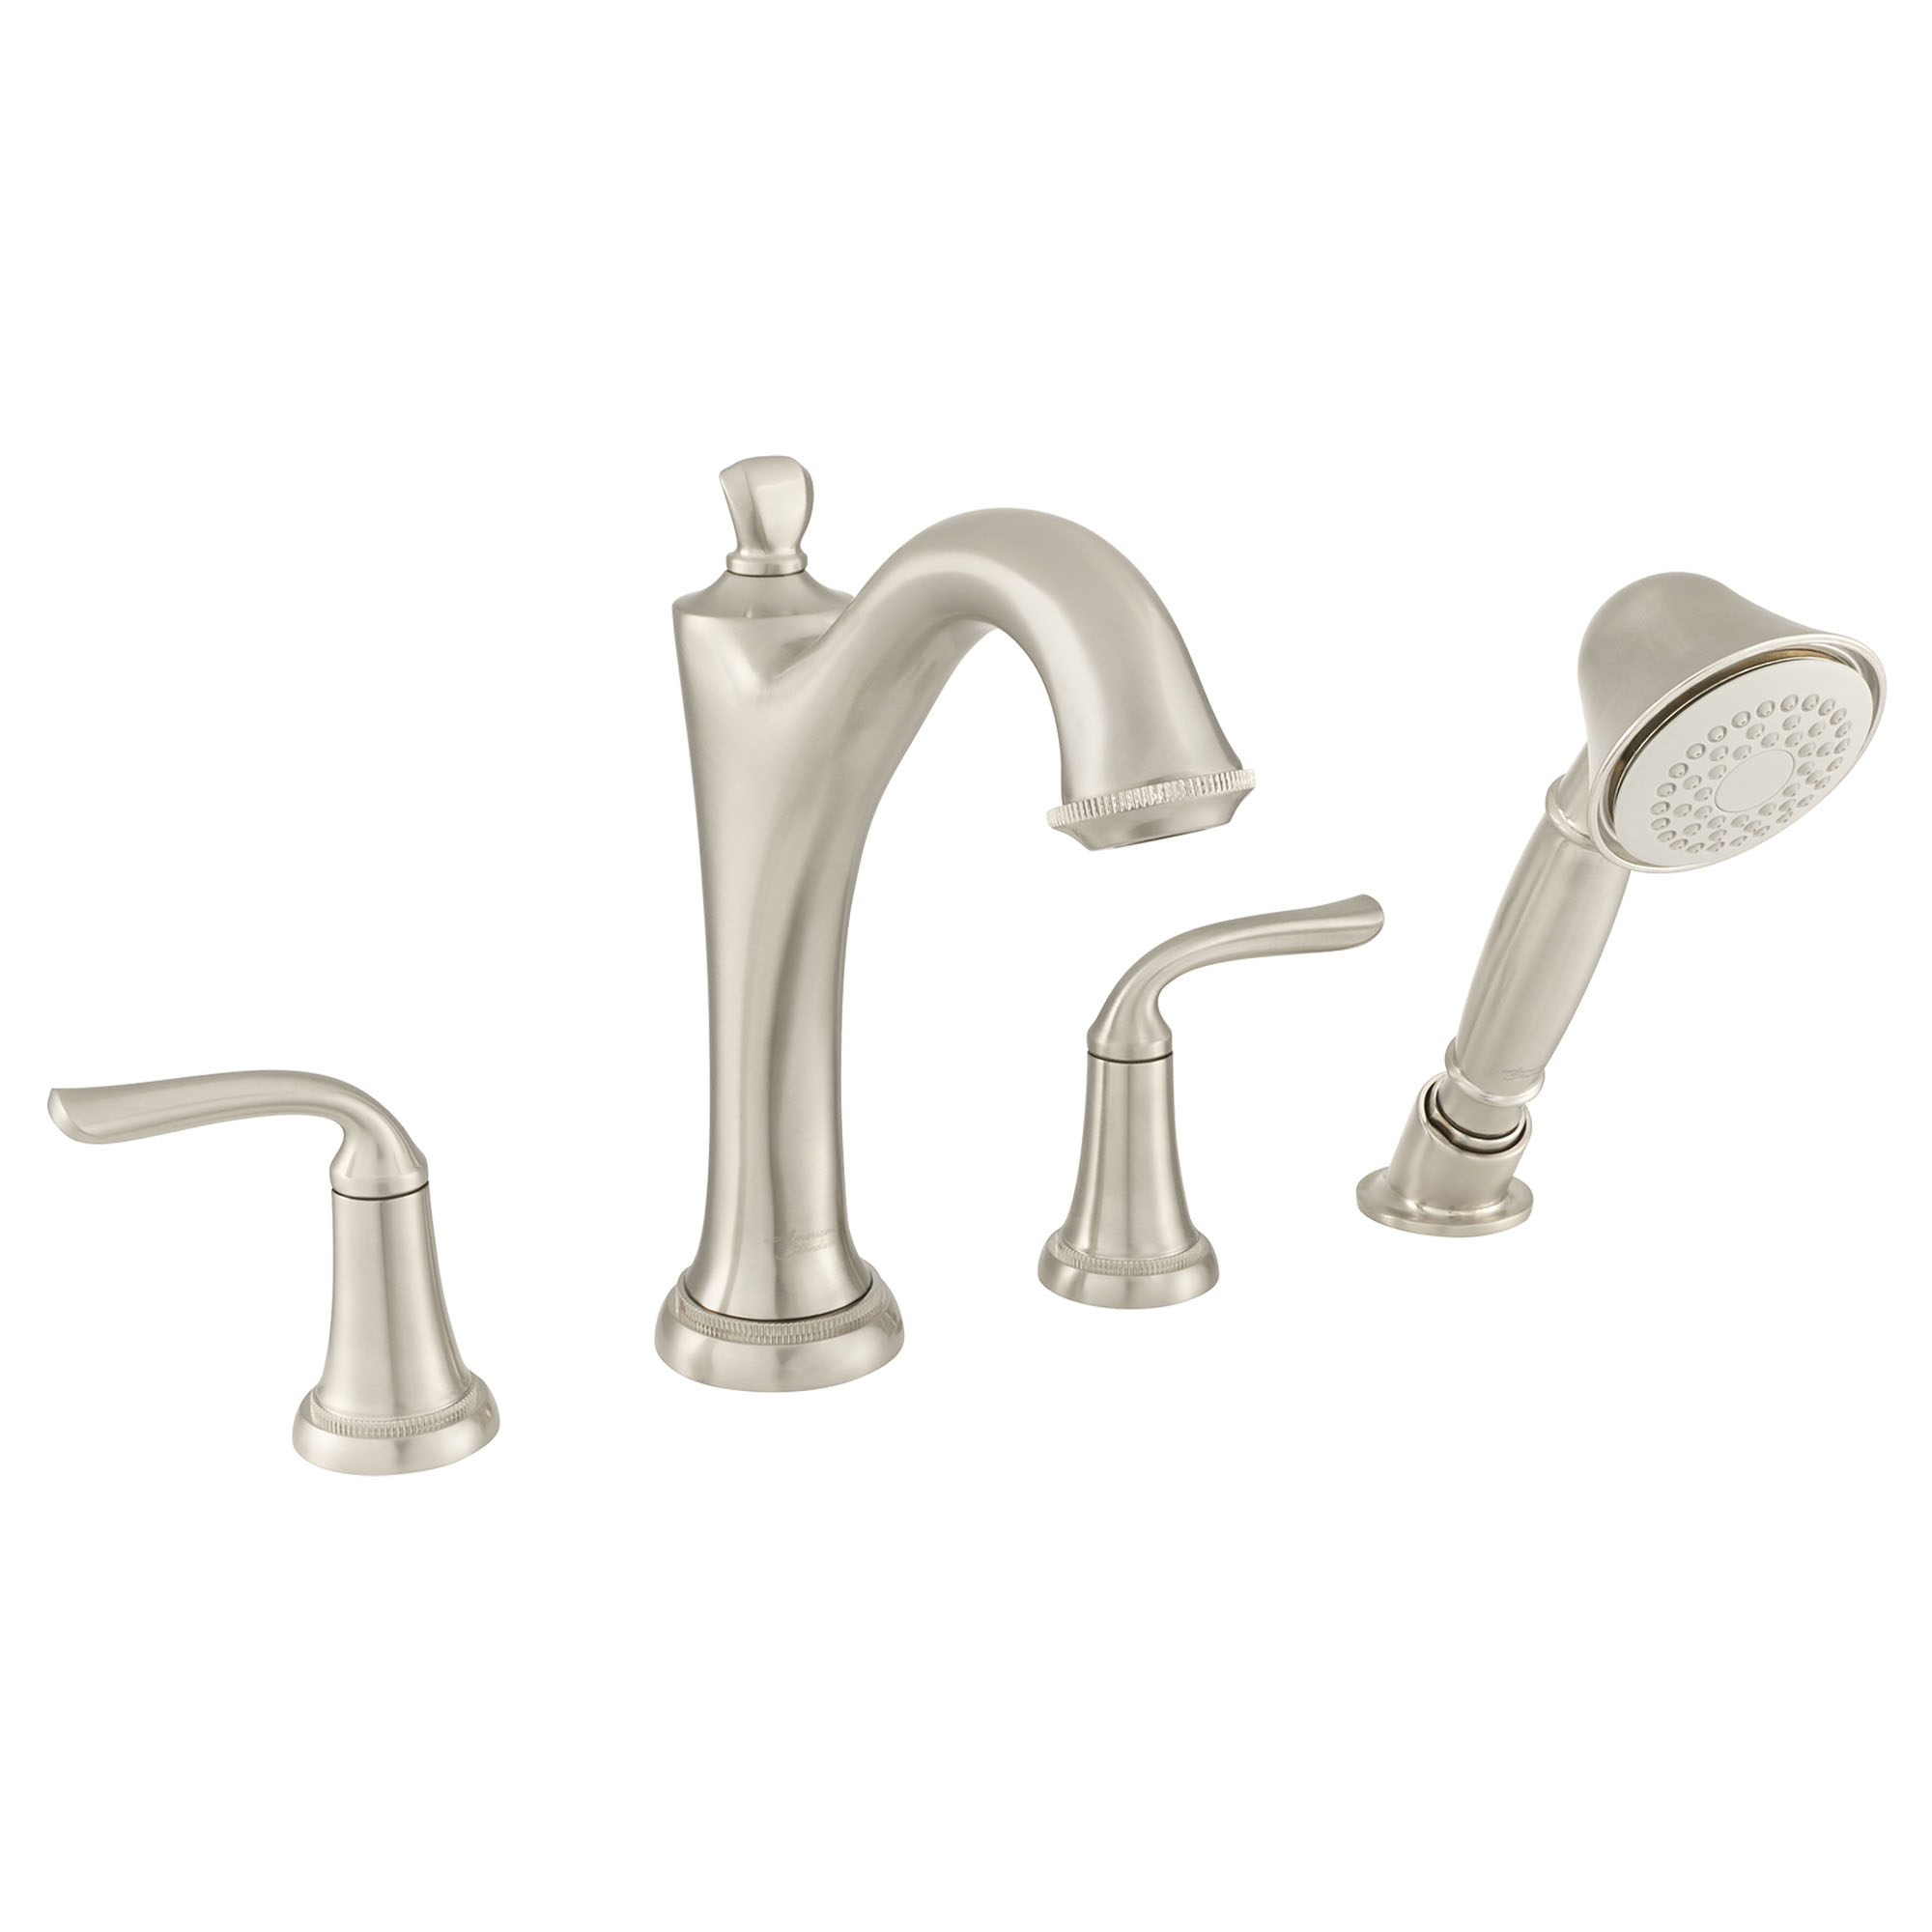 Patience® Bathtub Faucet With Lever Handles and Personal Shower for Flash® Rough-In Valve